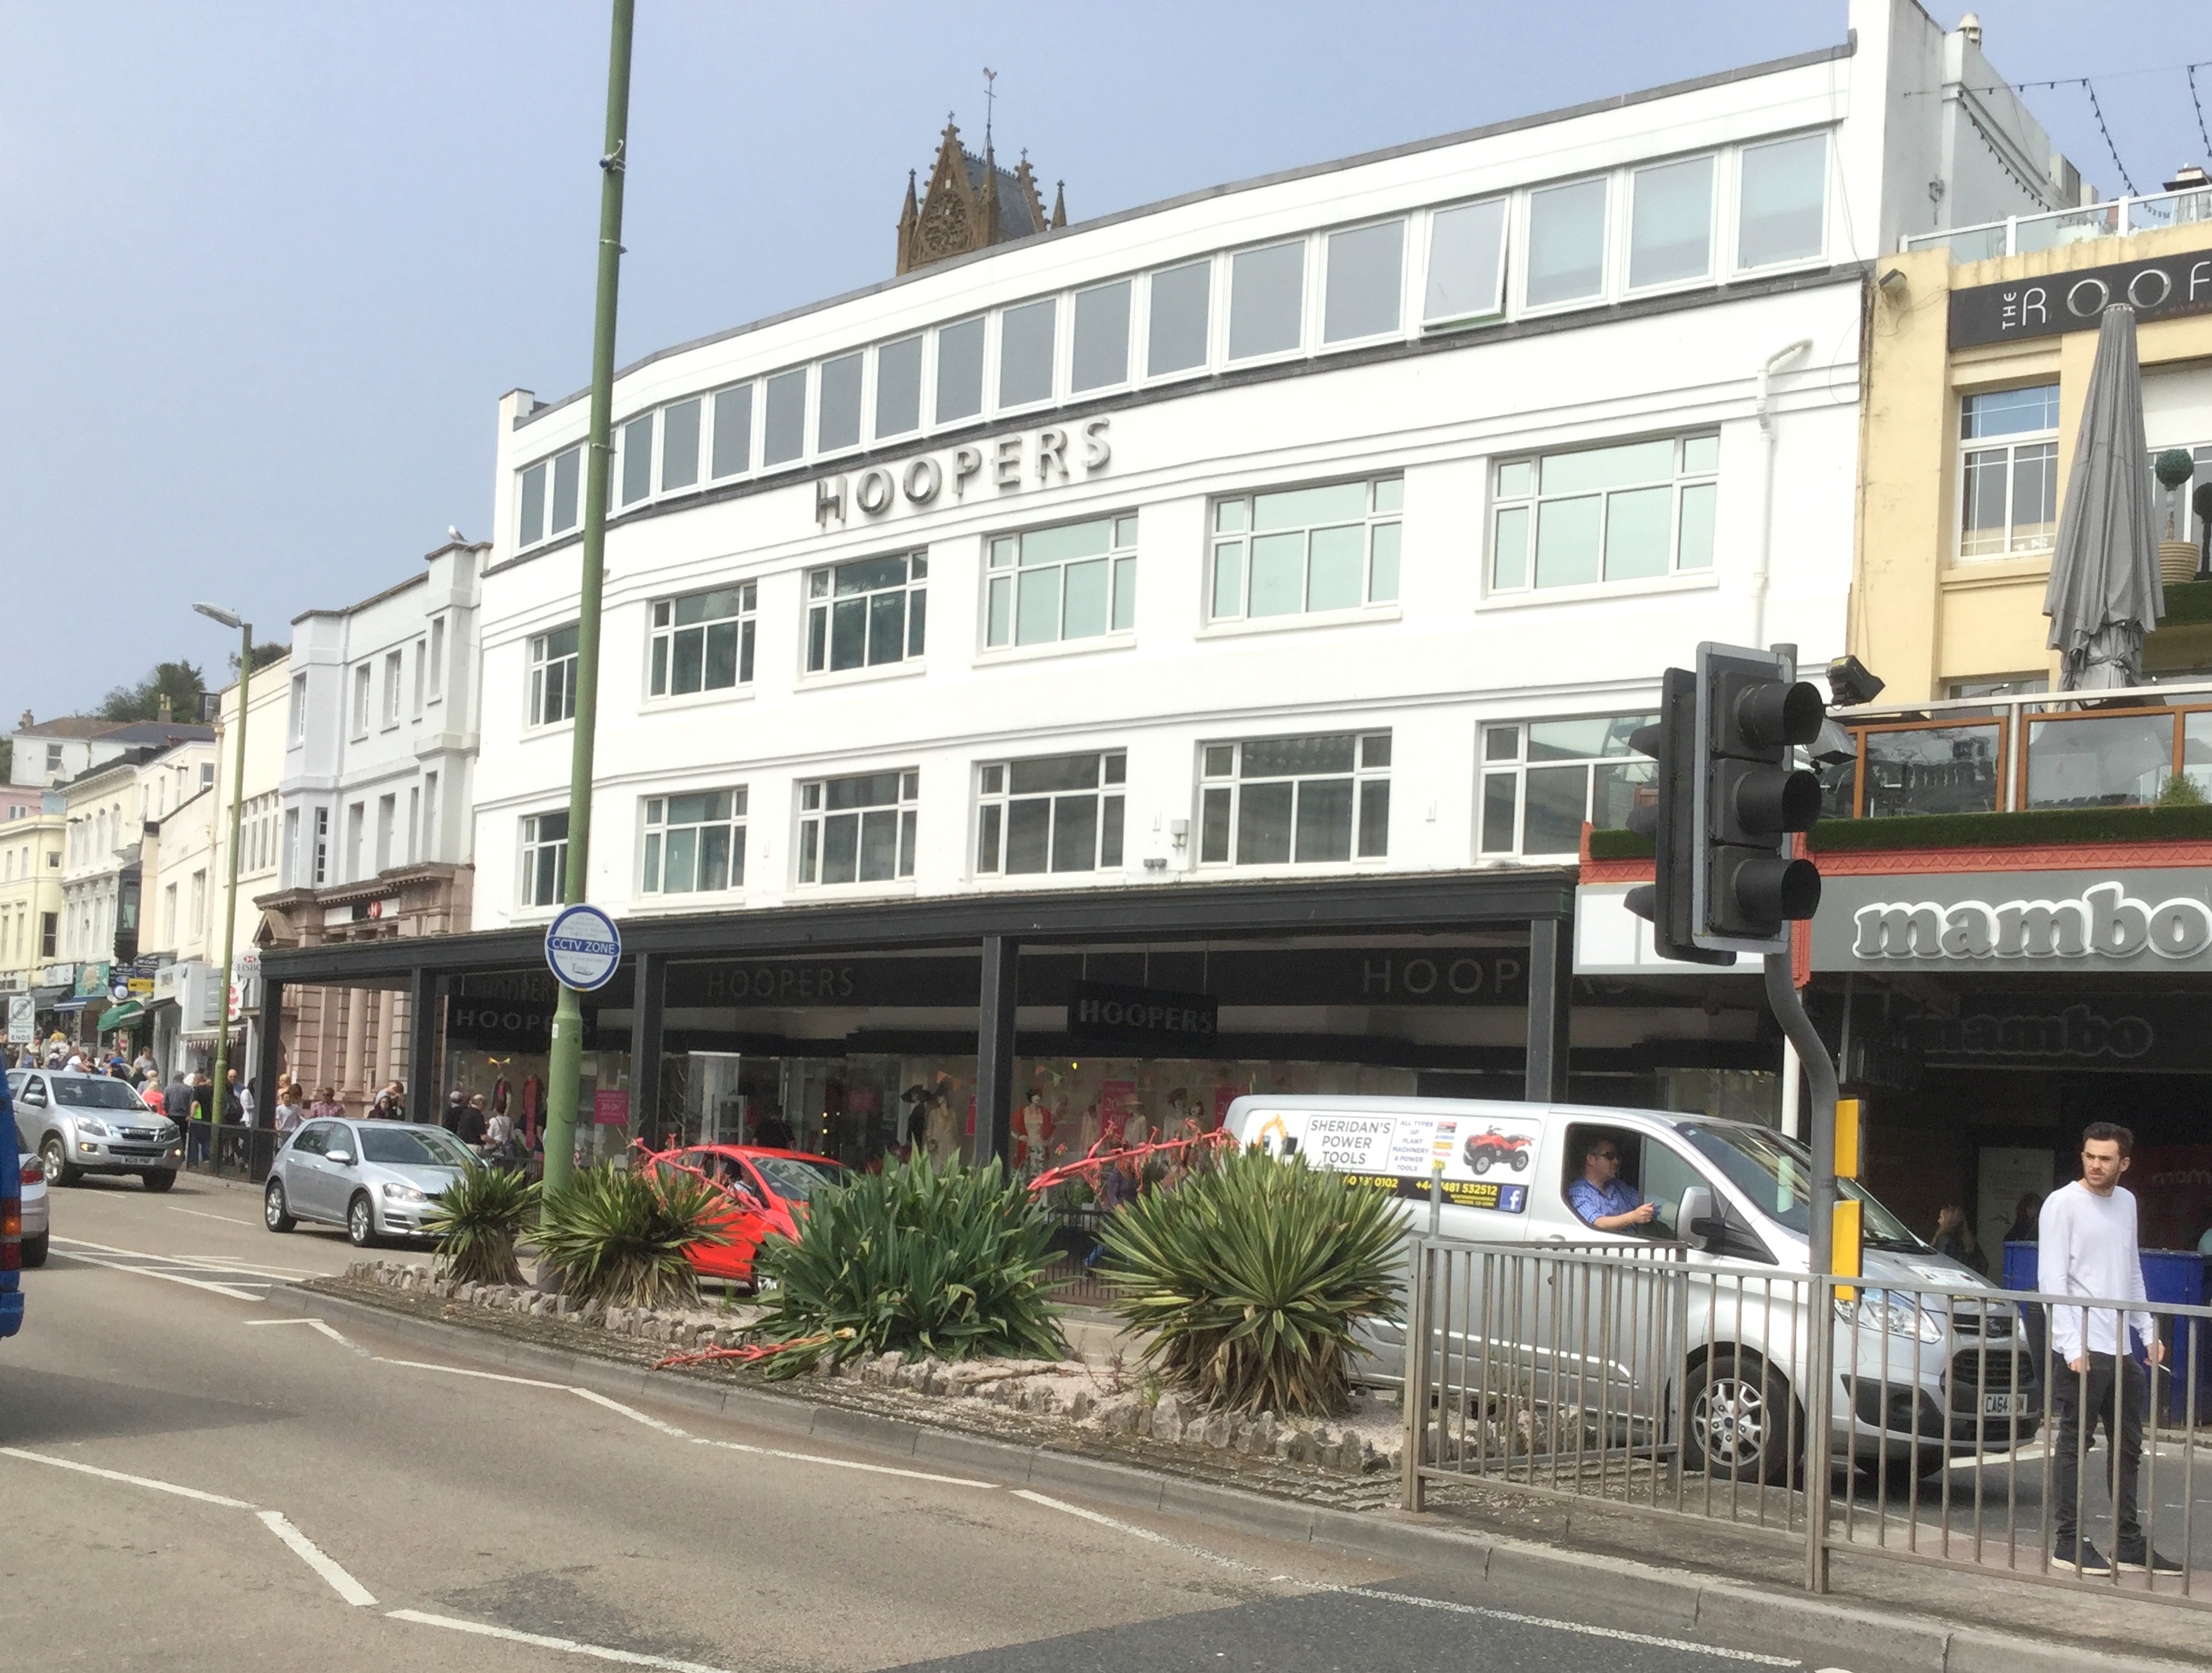 Hoopers Department Store on the harbourside of the south Devon town of Torquay